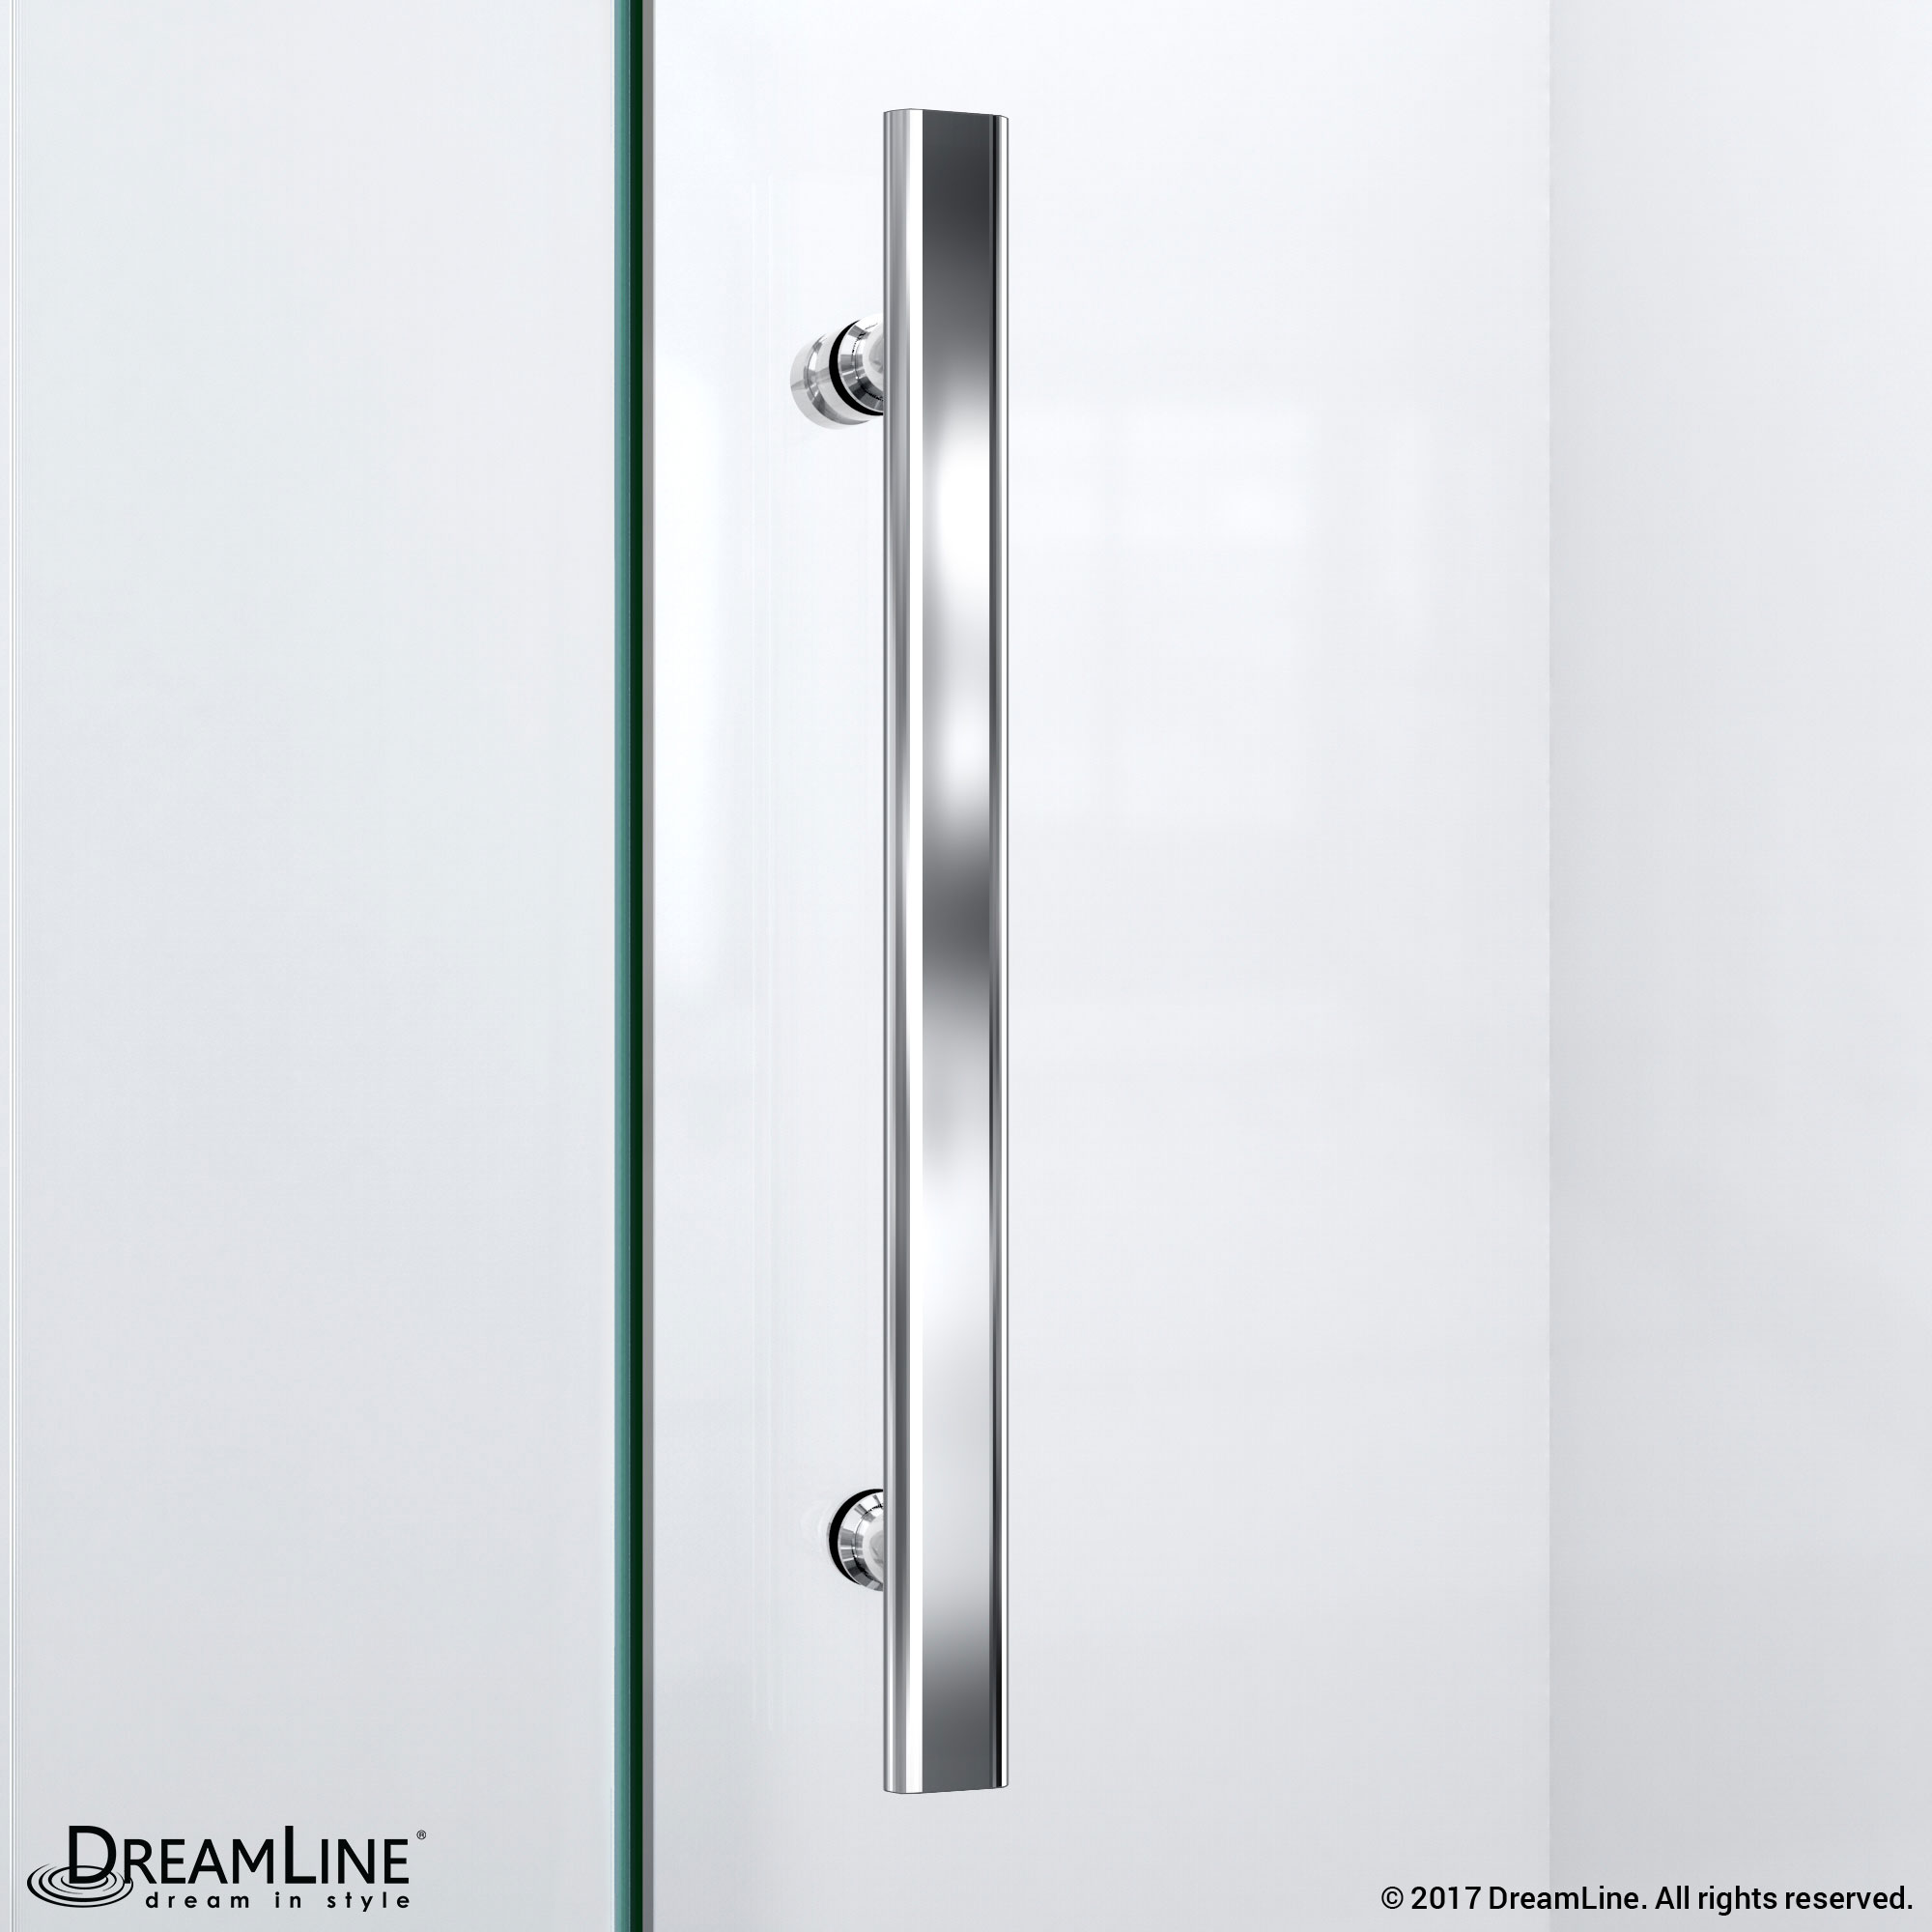 DreamLine Prism Lux 36 in. D x 36 in. W x 74 3/4 in. H Hinged Shower Enclosure in Chrome with Corner Drain White Base Kit